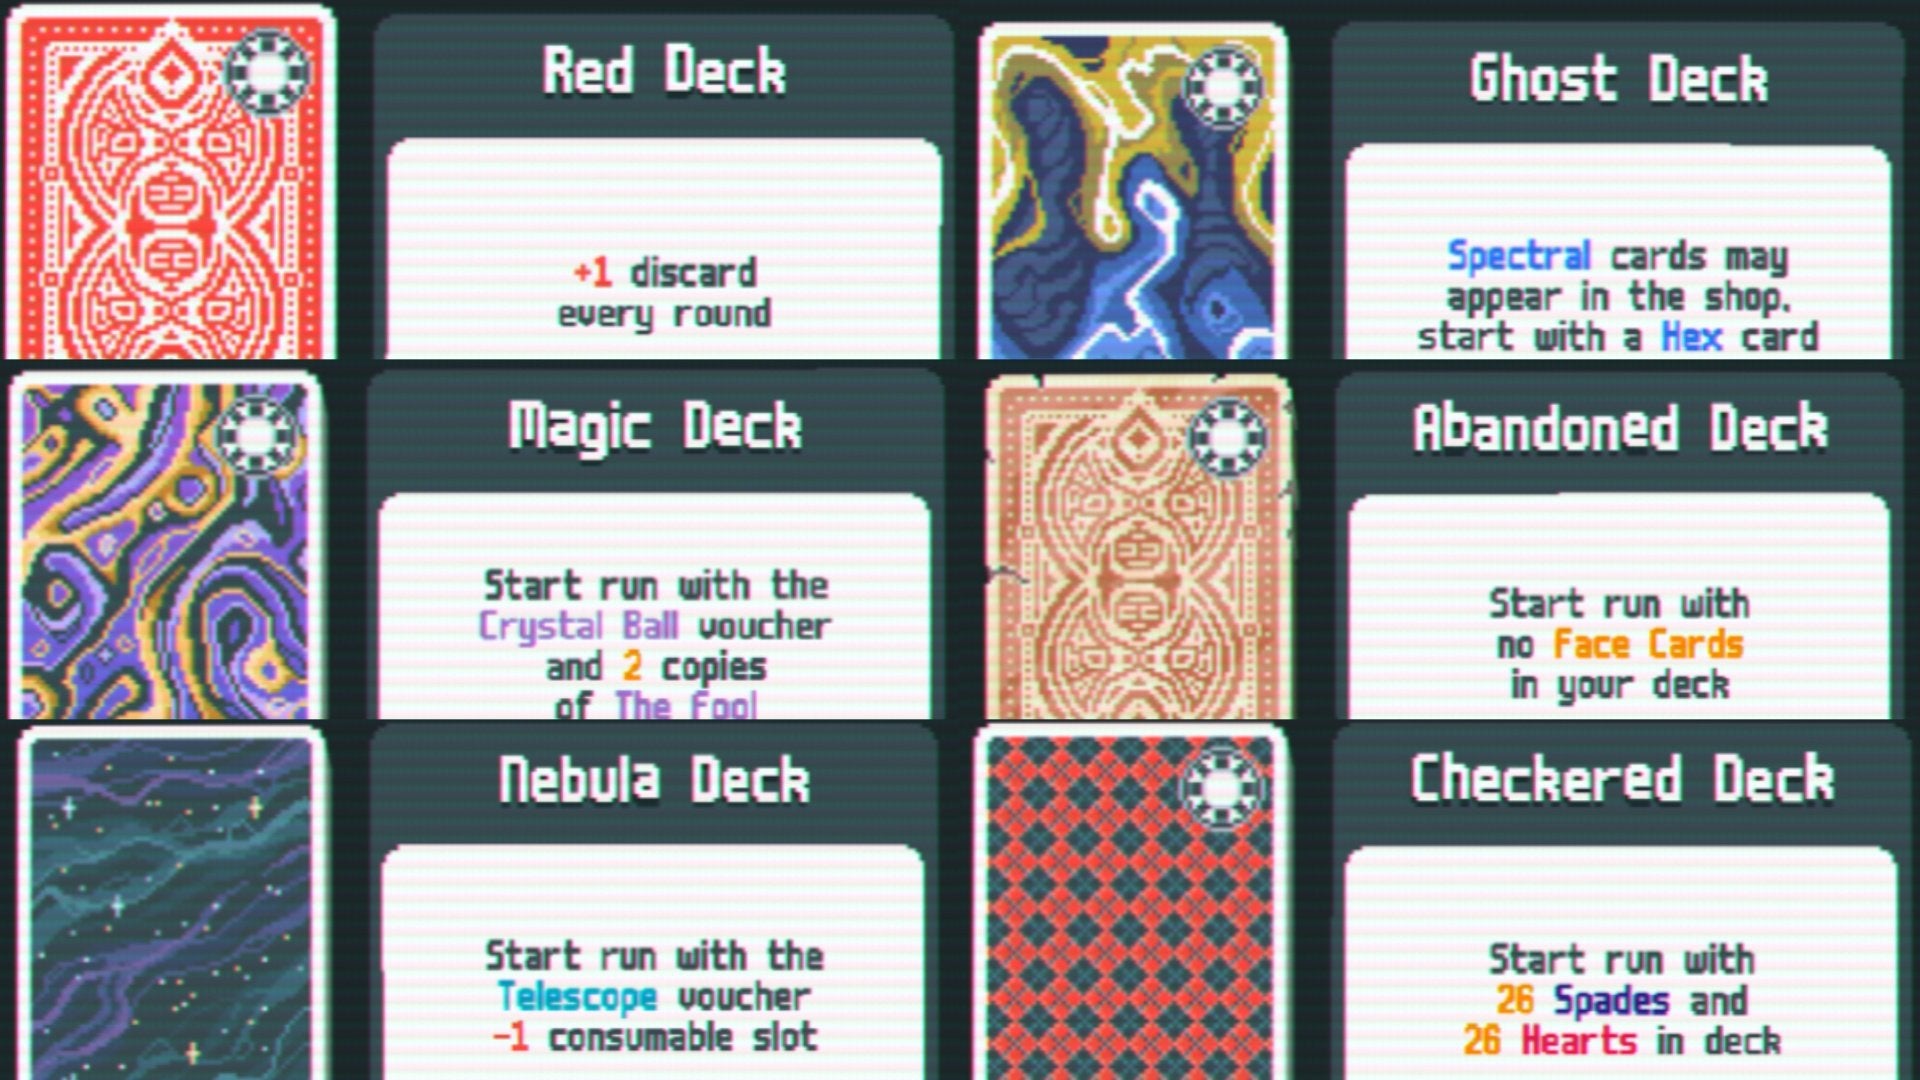 Six Decks in Balatro, in clockwise order: Ghost Deck, Abandoned Deck, Checkered Deck, Nebula Deck, Magic Deck, and Red Deck.